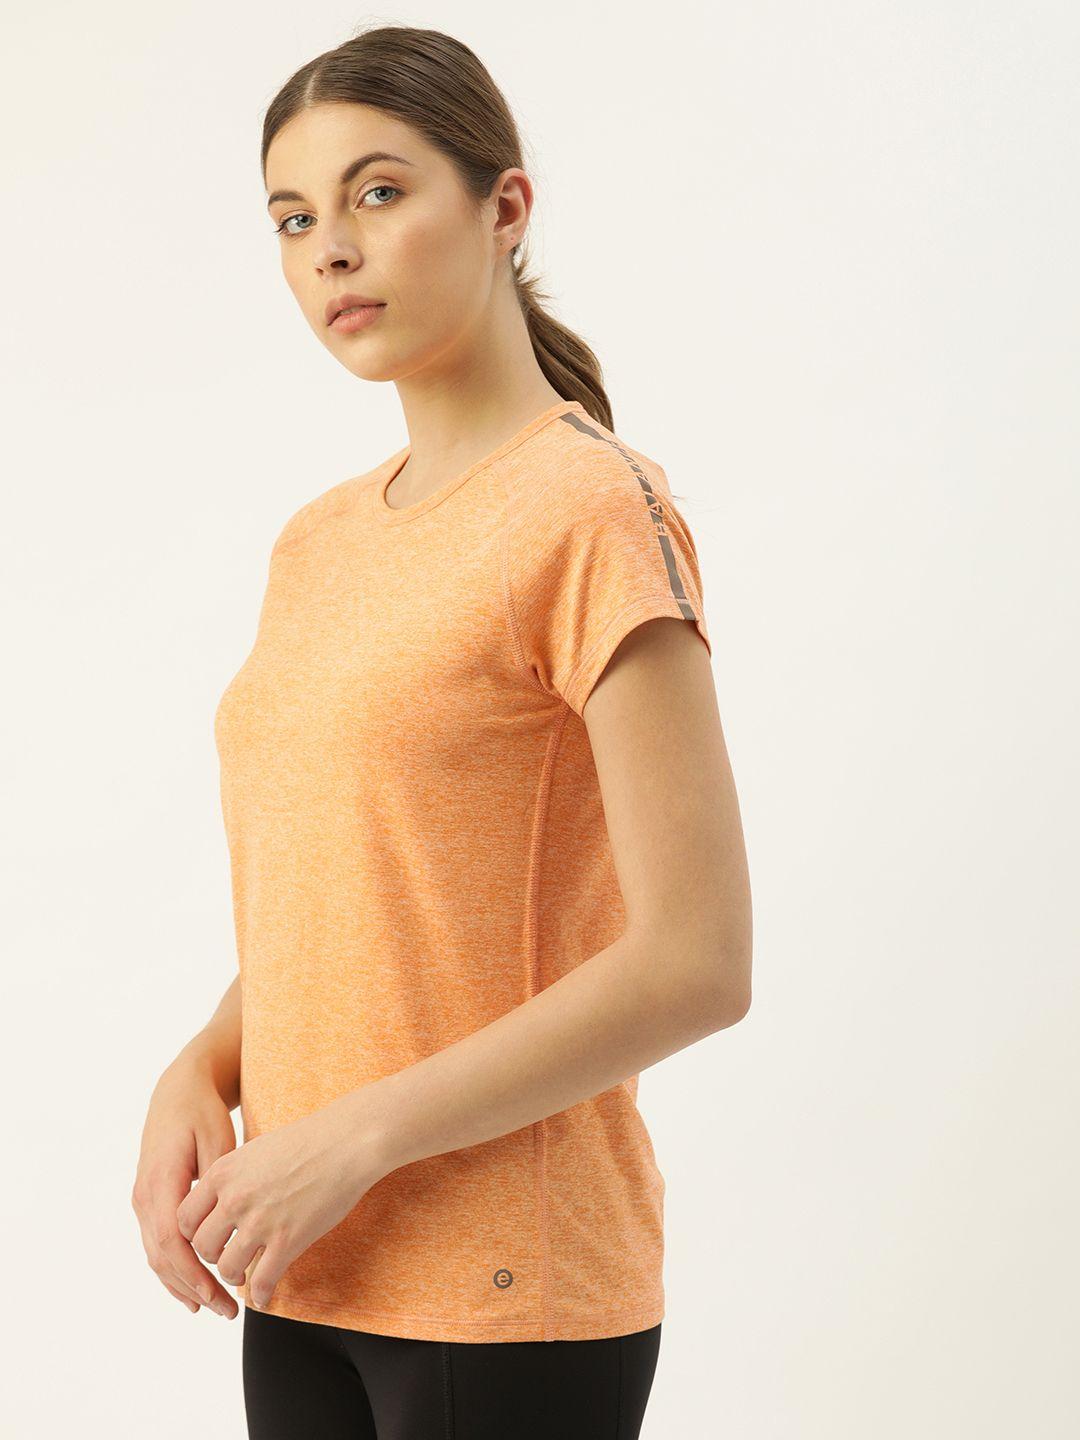 "enamor-women-peach-cider-solid-round-neck-slim-fit-rapid-dry-and-antimicrobial-t-shirt